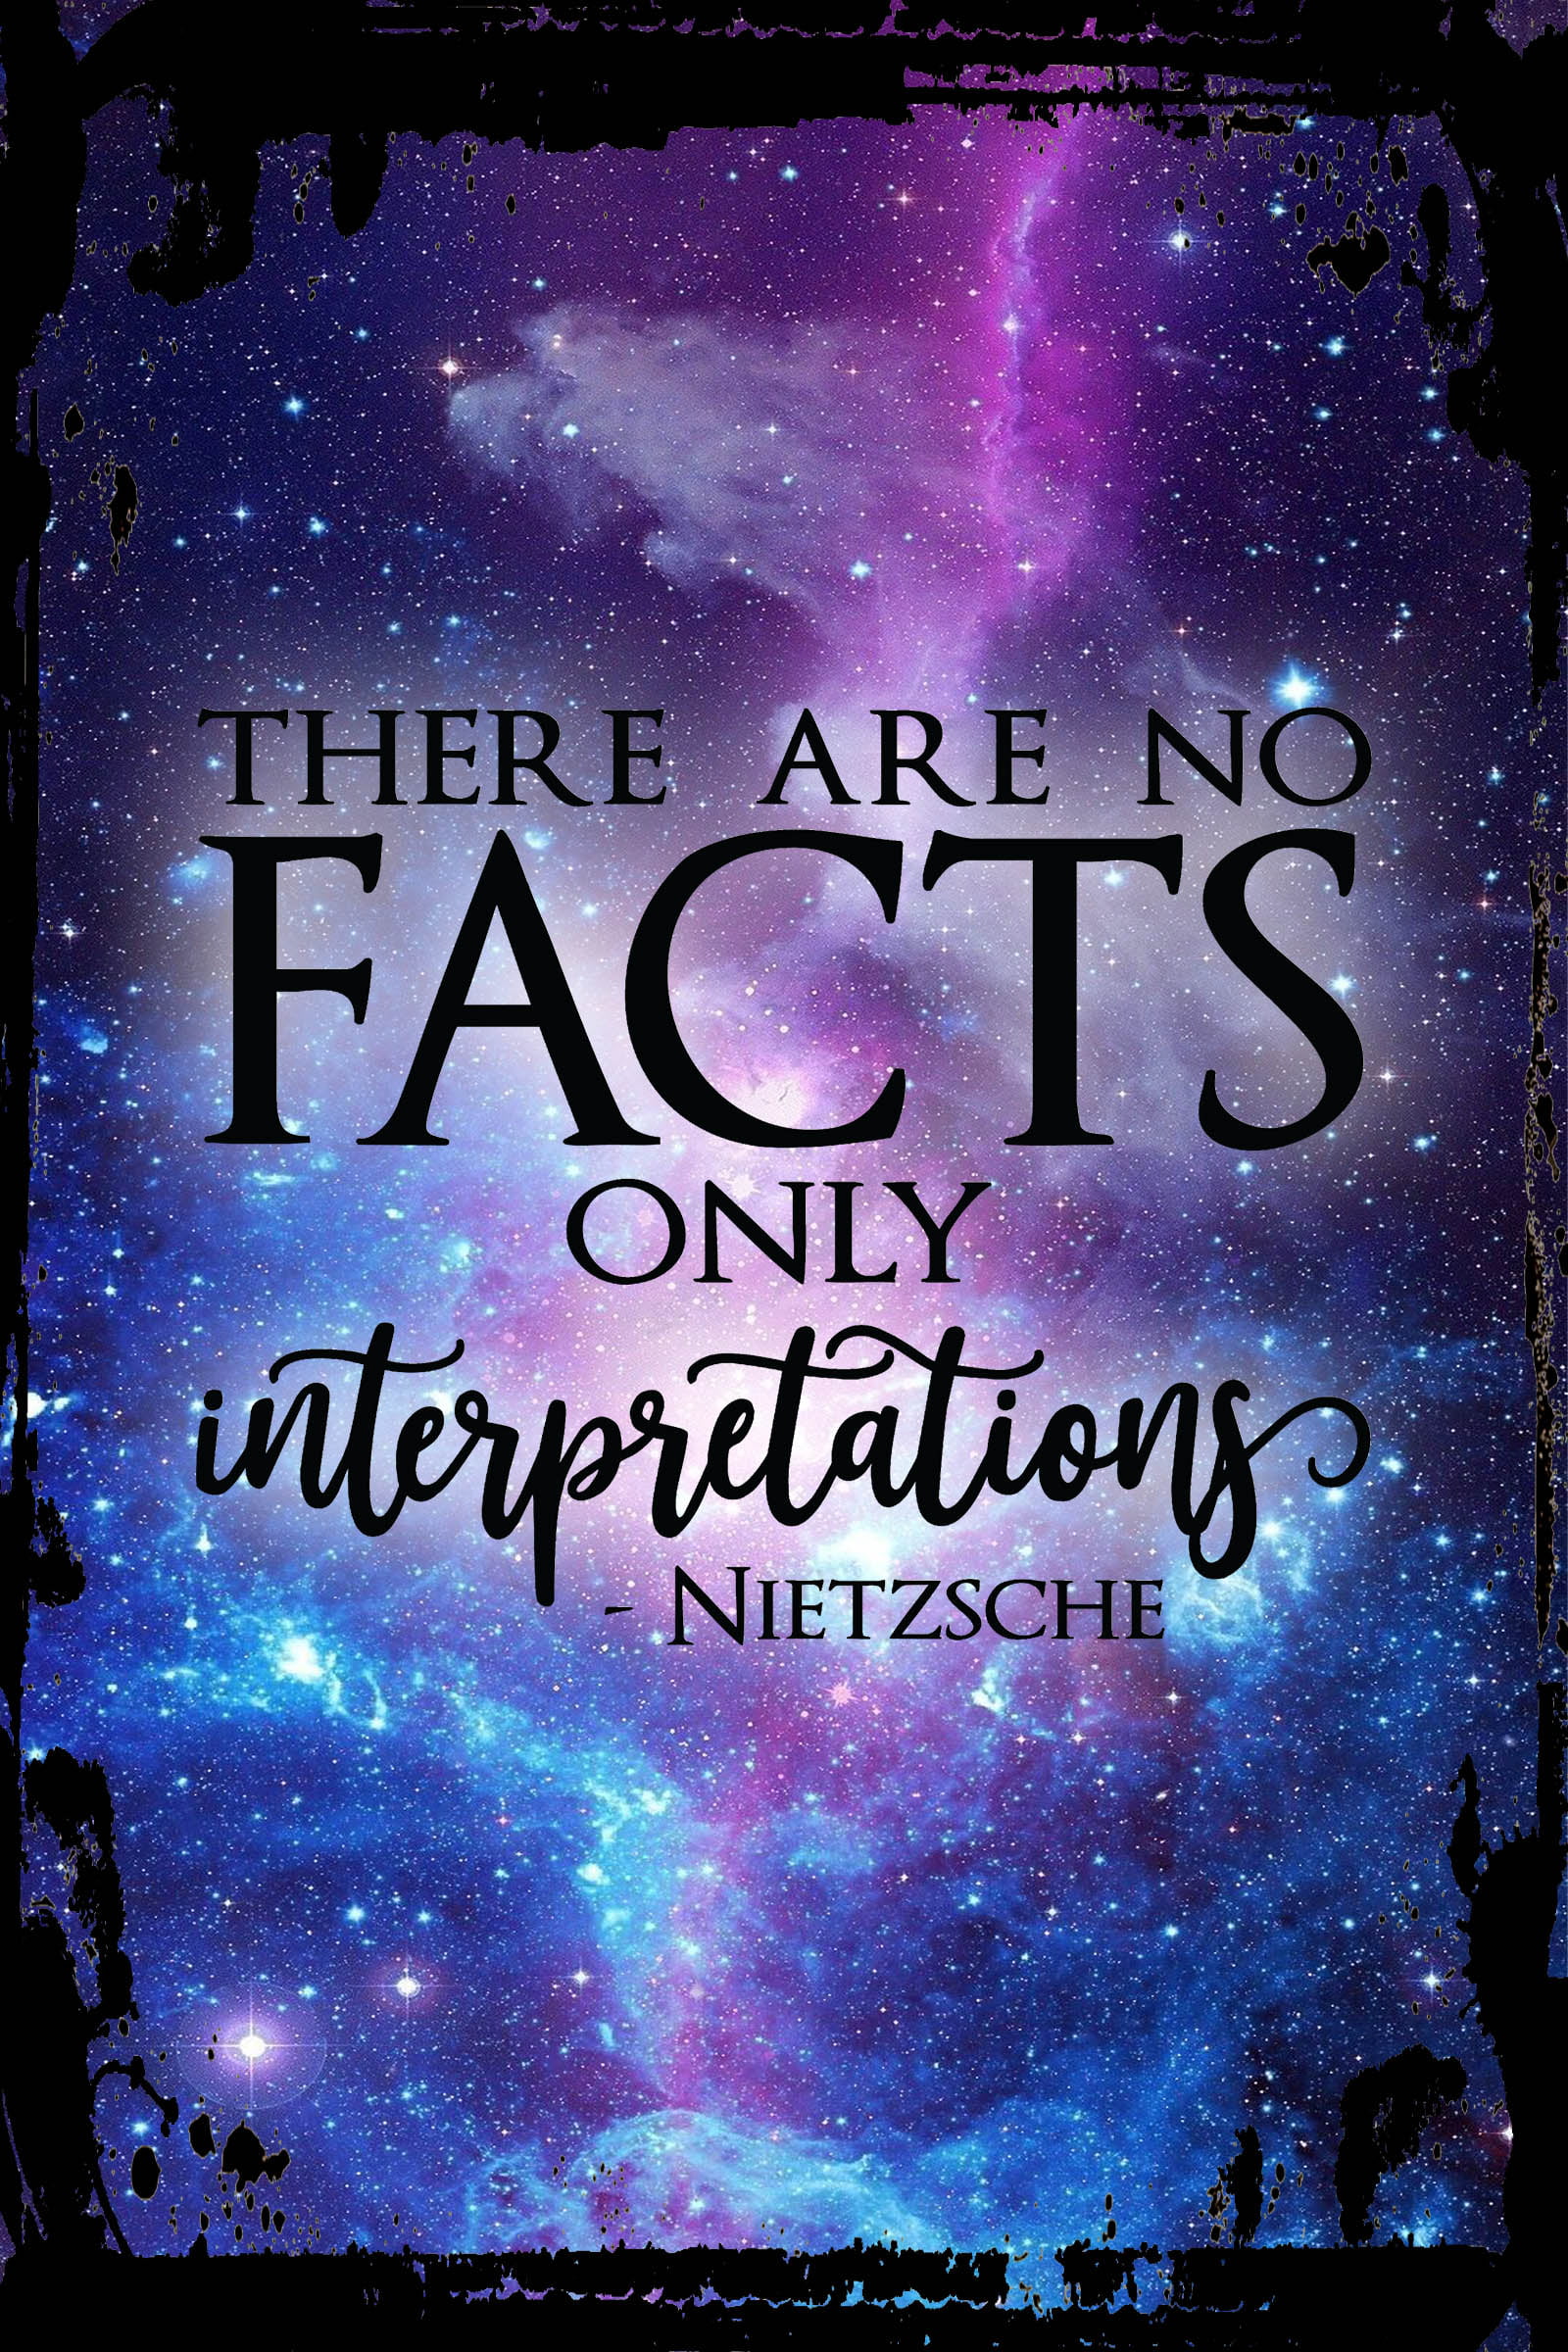 Galaxy Inspirational Wall Art There are no facts only interpretations  Nietzsche quote Metal Wall Art Decor Funny Gift 